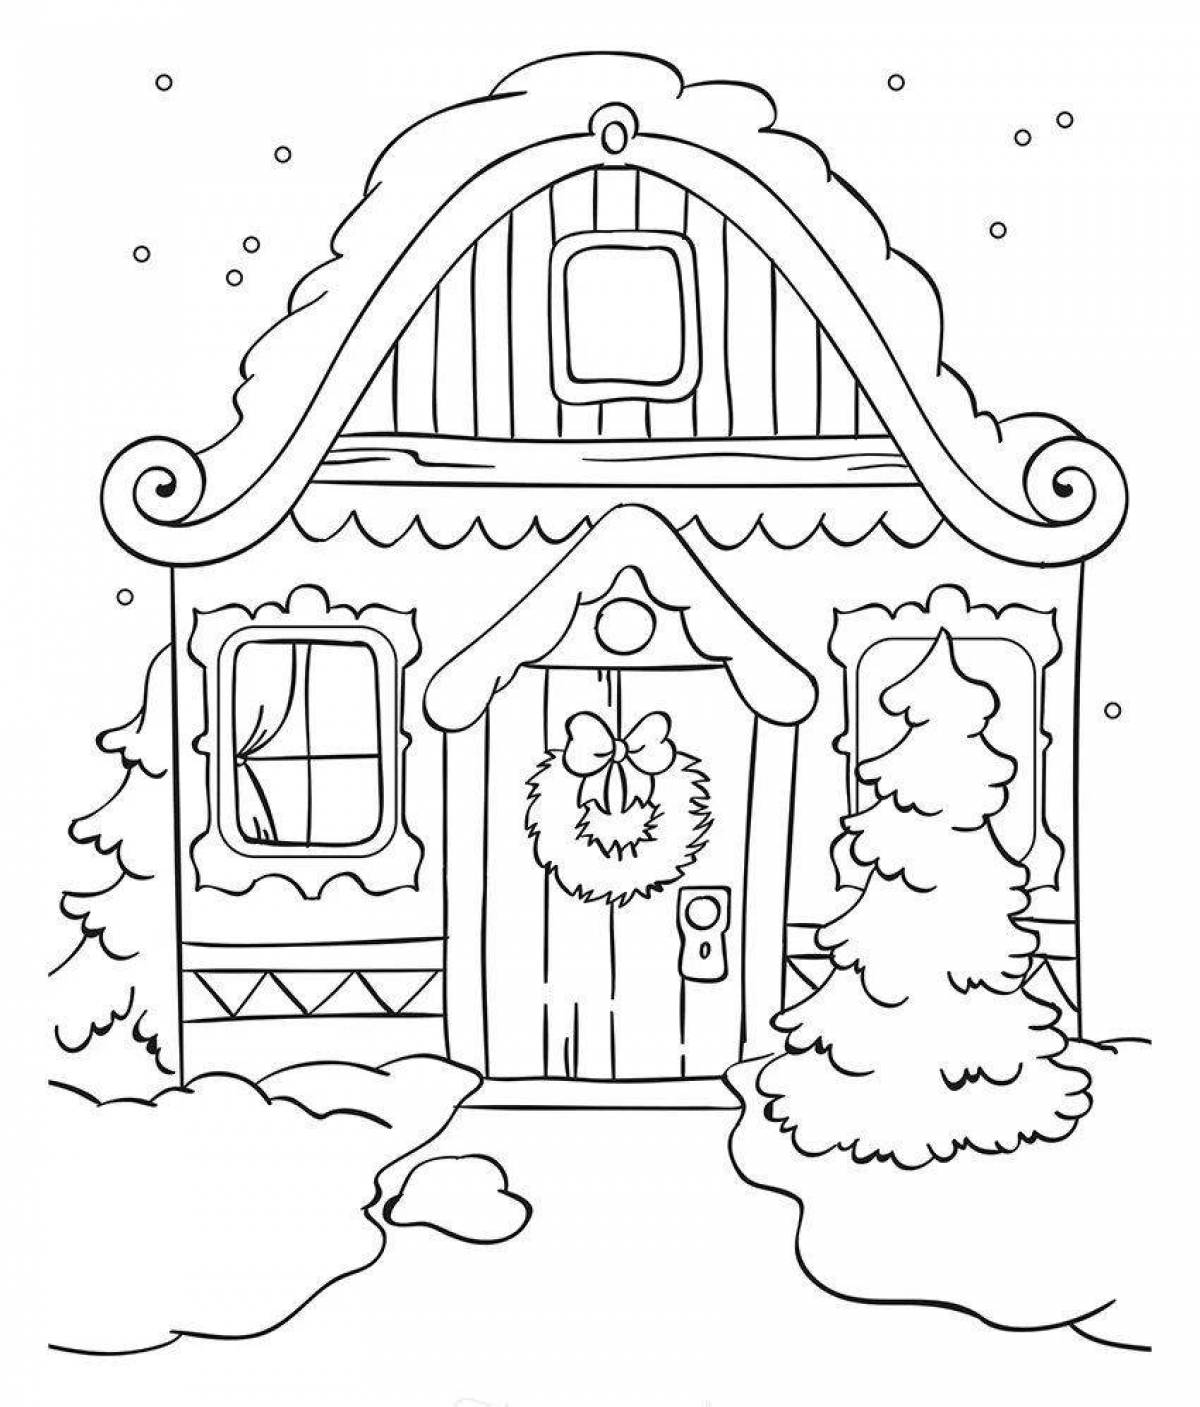 Coloring book festive New Year's house